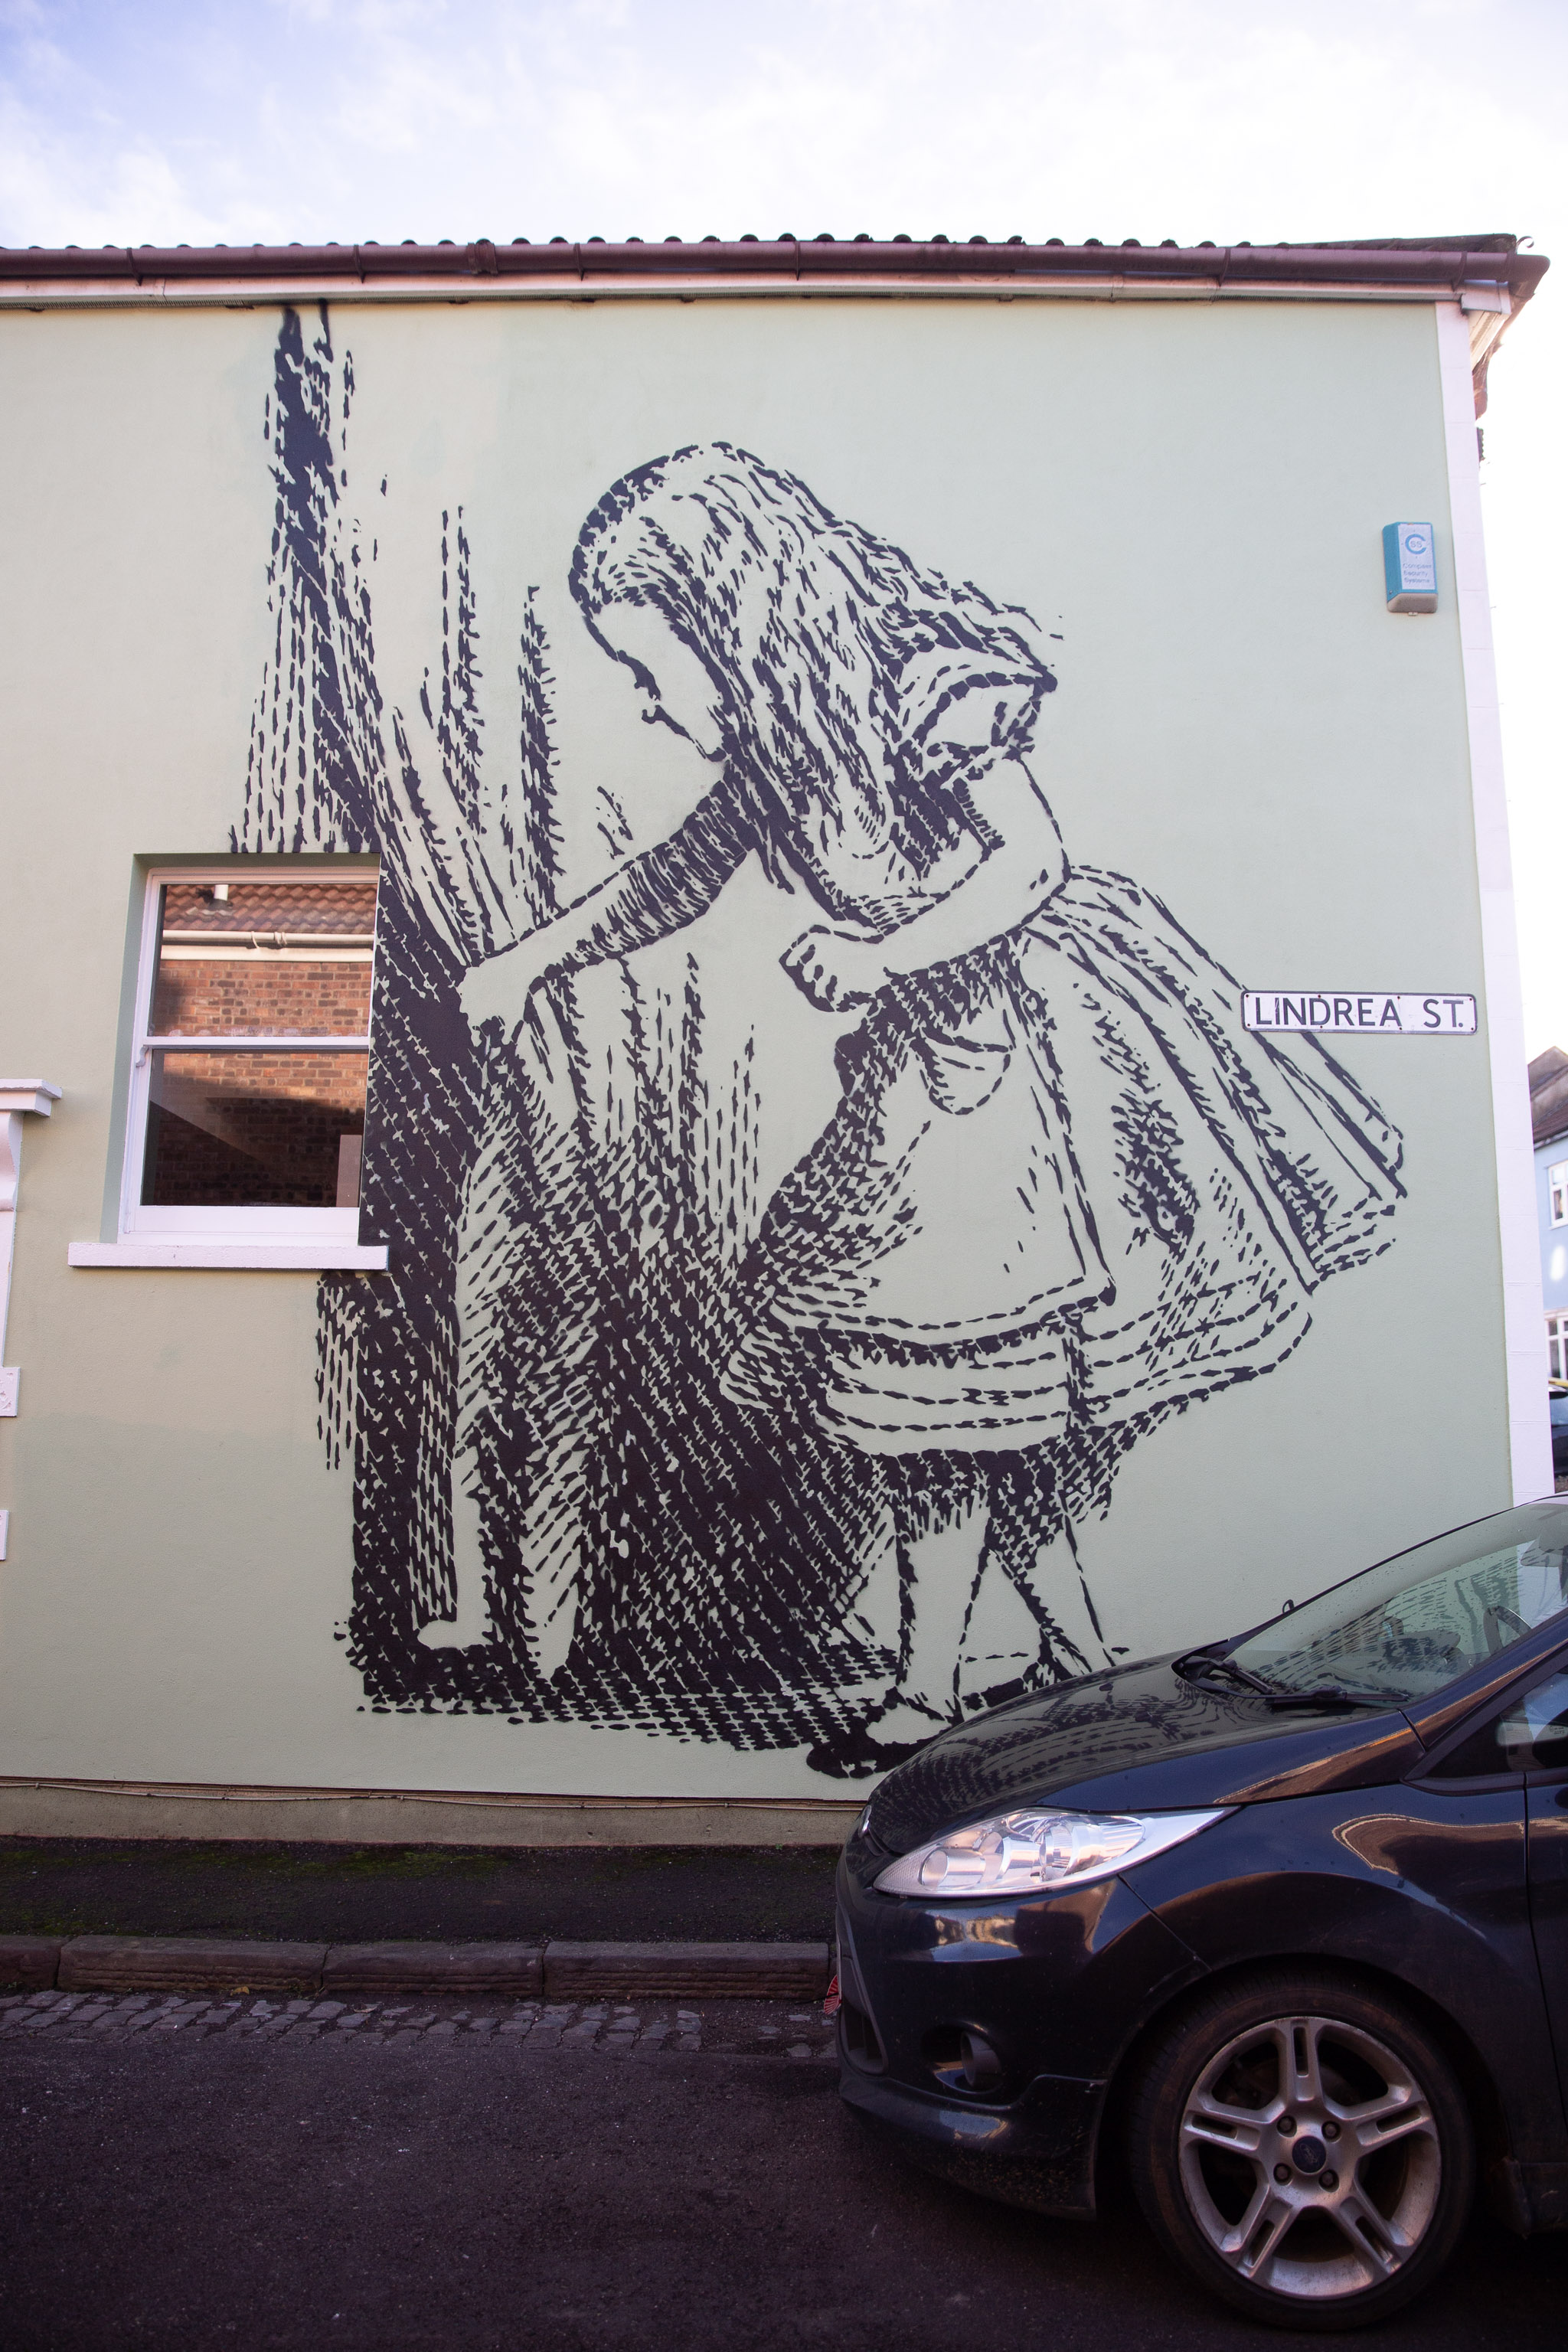 Alice 2
The original artist is John Tenniel (whose name I can never remember.) It was Stewy and homeowner Alison Larkman who did the work of putting it on...